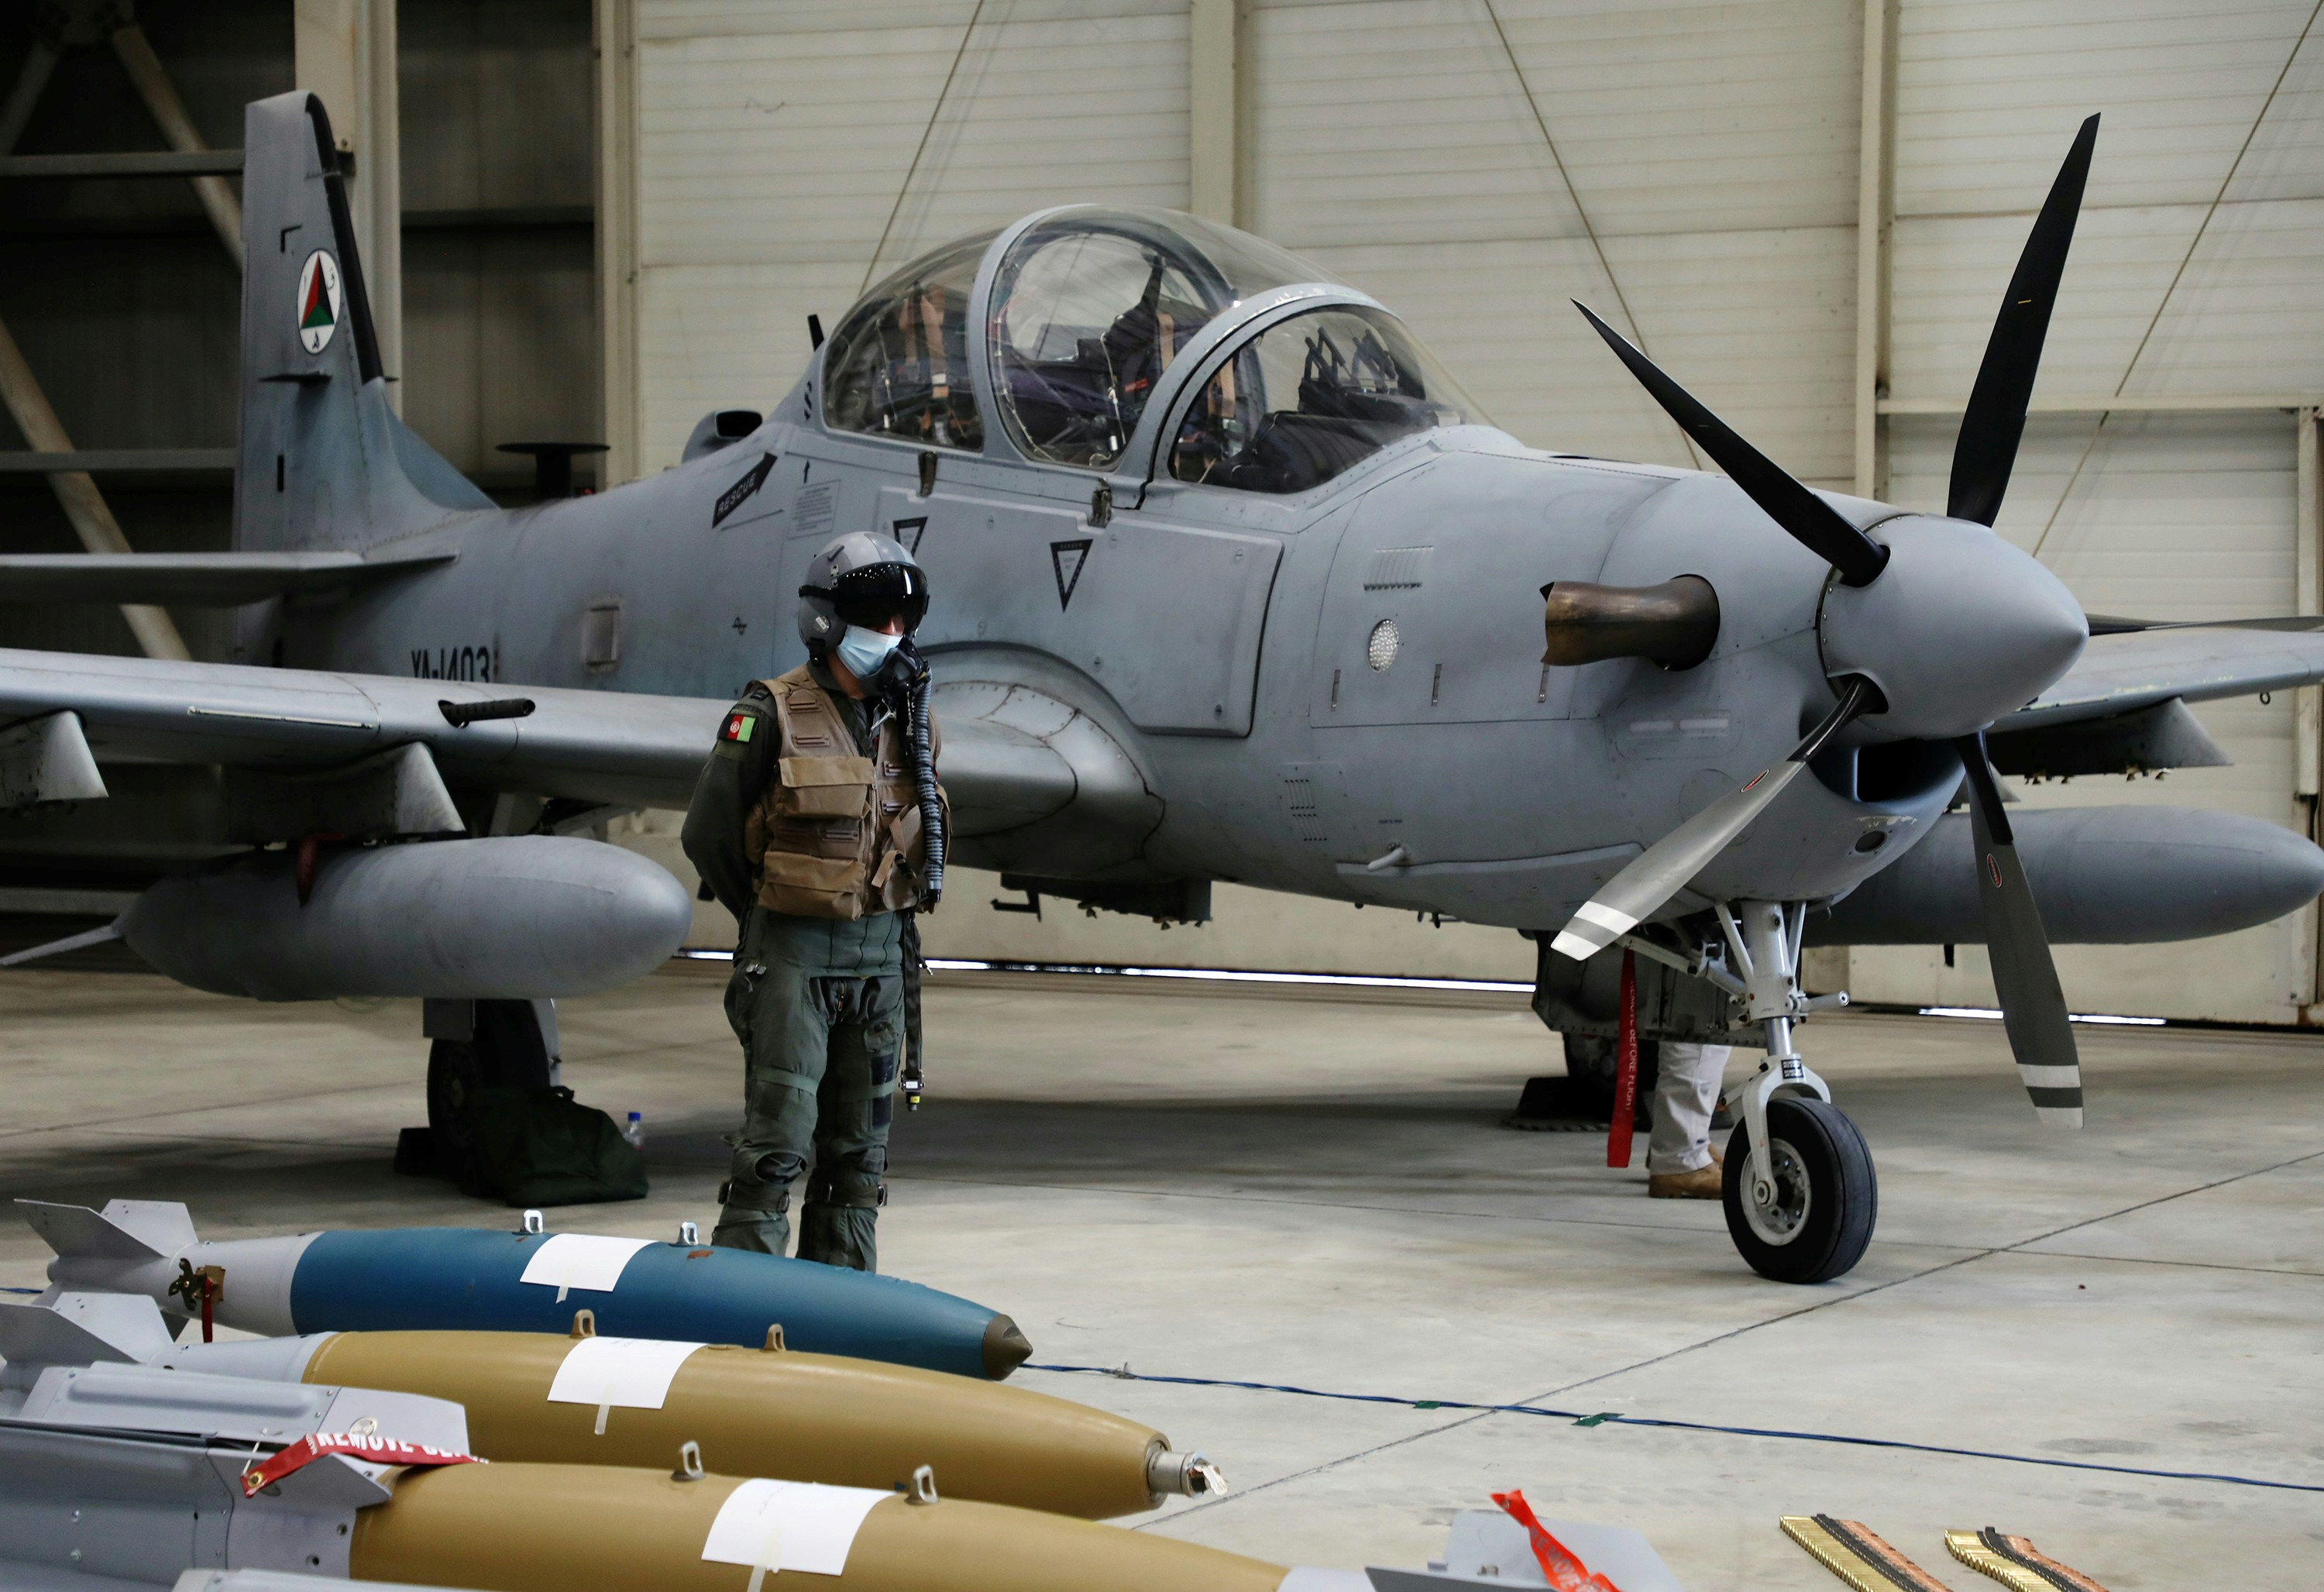 An Afghan pilot stands next to A-29 Super Tucano plane during a handover ceremony of A-29 Super Tucano planes from U.S. to the Afghan forces, in Kabul, Afghanistan September 17, 2020. REUTERS/Omar Sobhani - RC290J9DAOTC